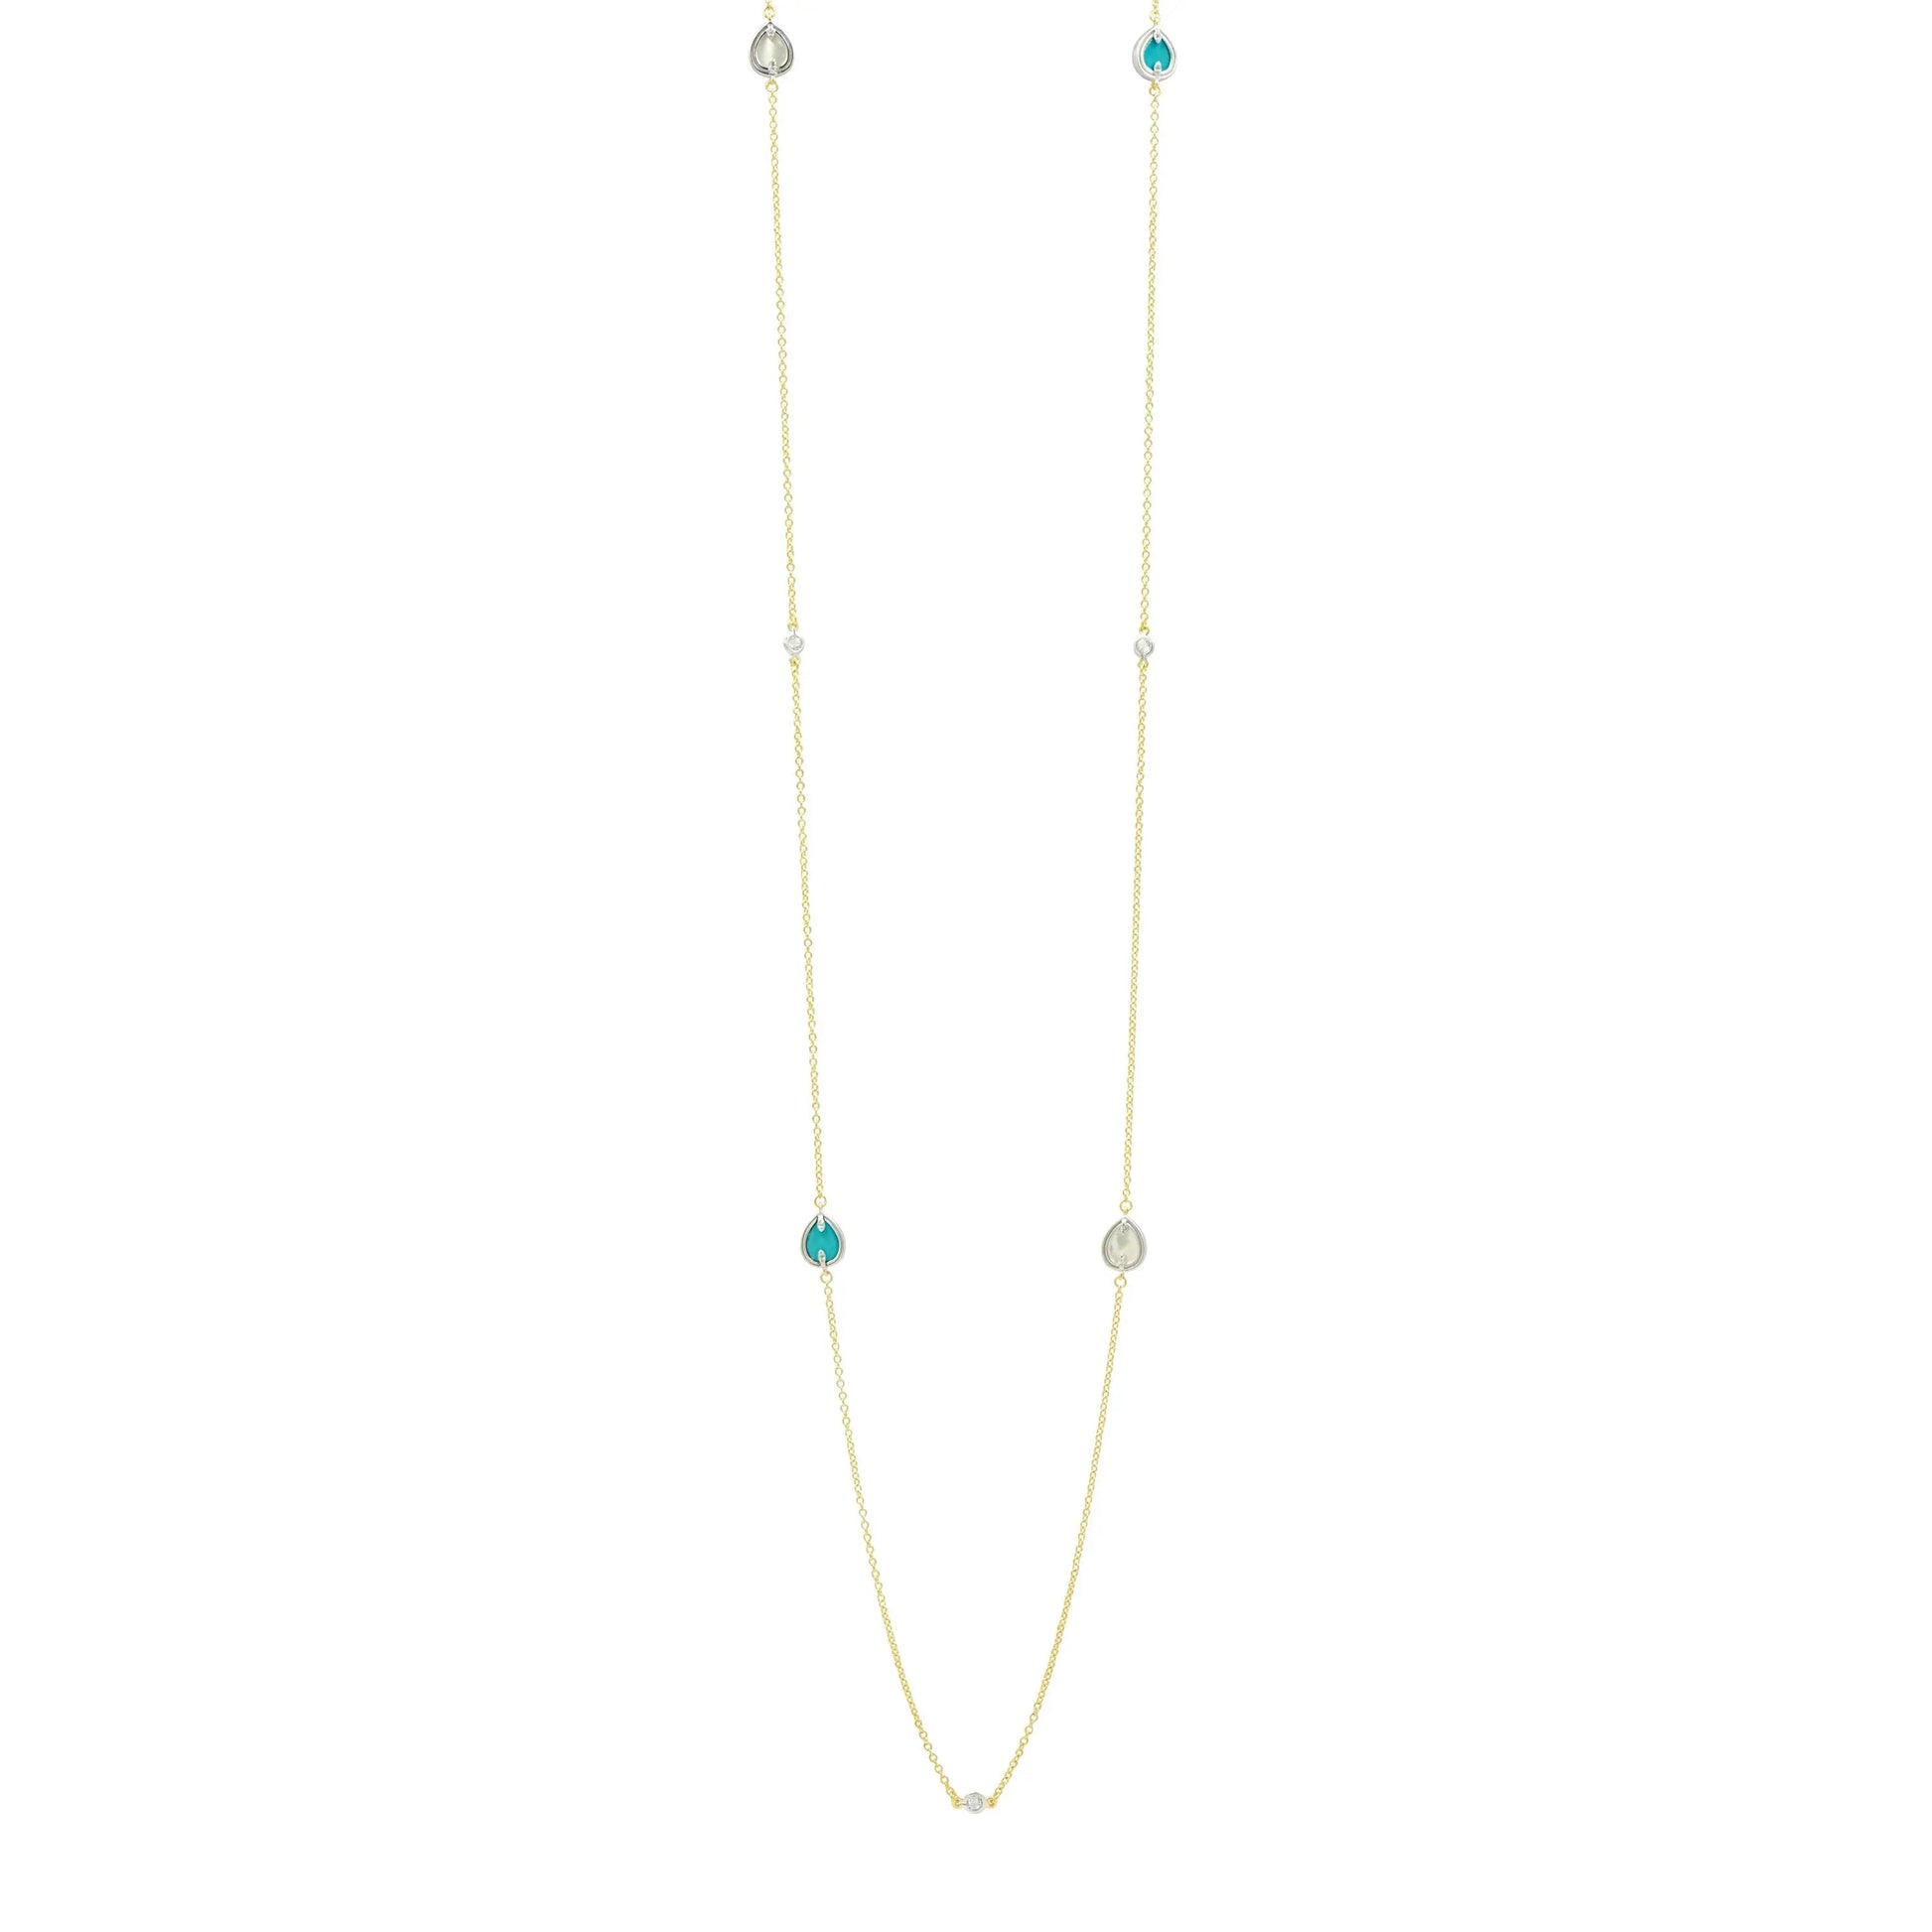  Fleur Bloom EMPIRE Turquoise Station Necklace Fleur Bloom Empire NECKLACE